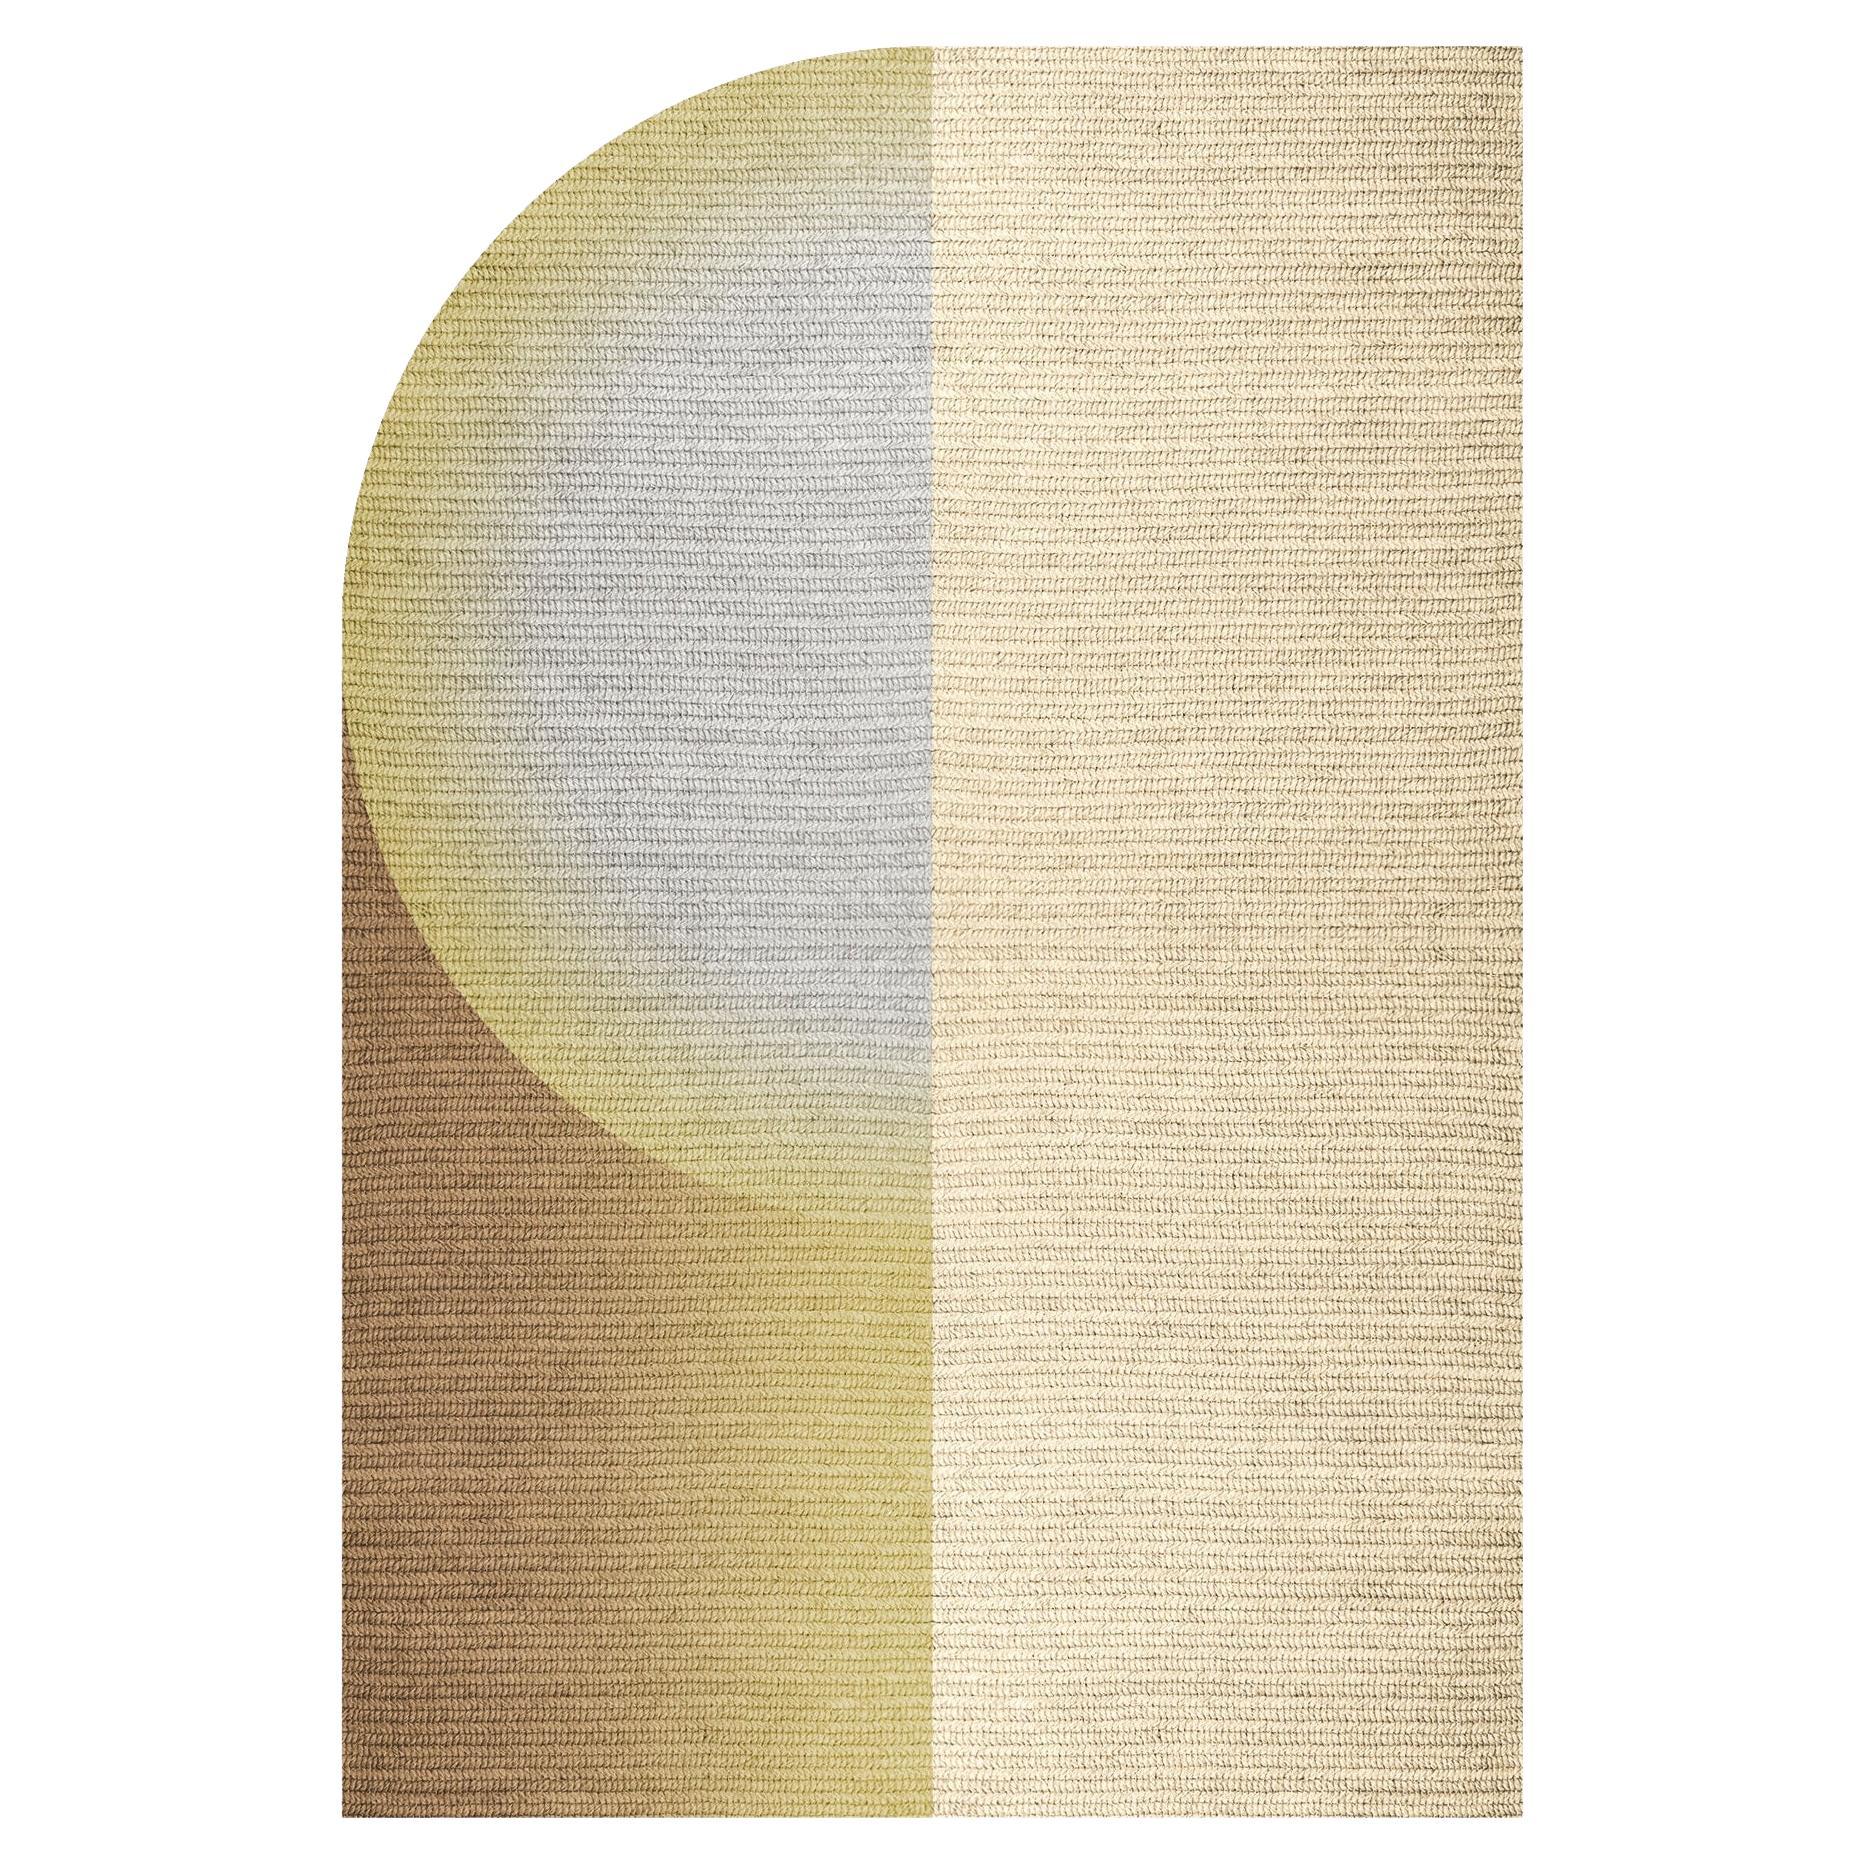 'Glow' Rug in Abaca, Colour 'Pampas' 160x240cm by Claire Vos for Musett Design